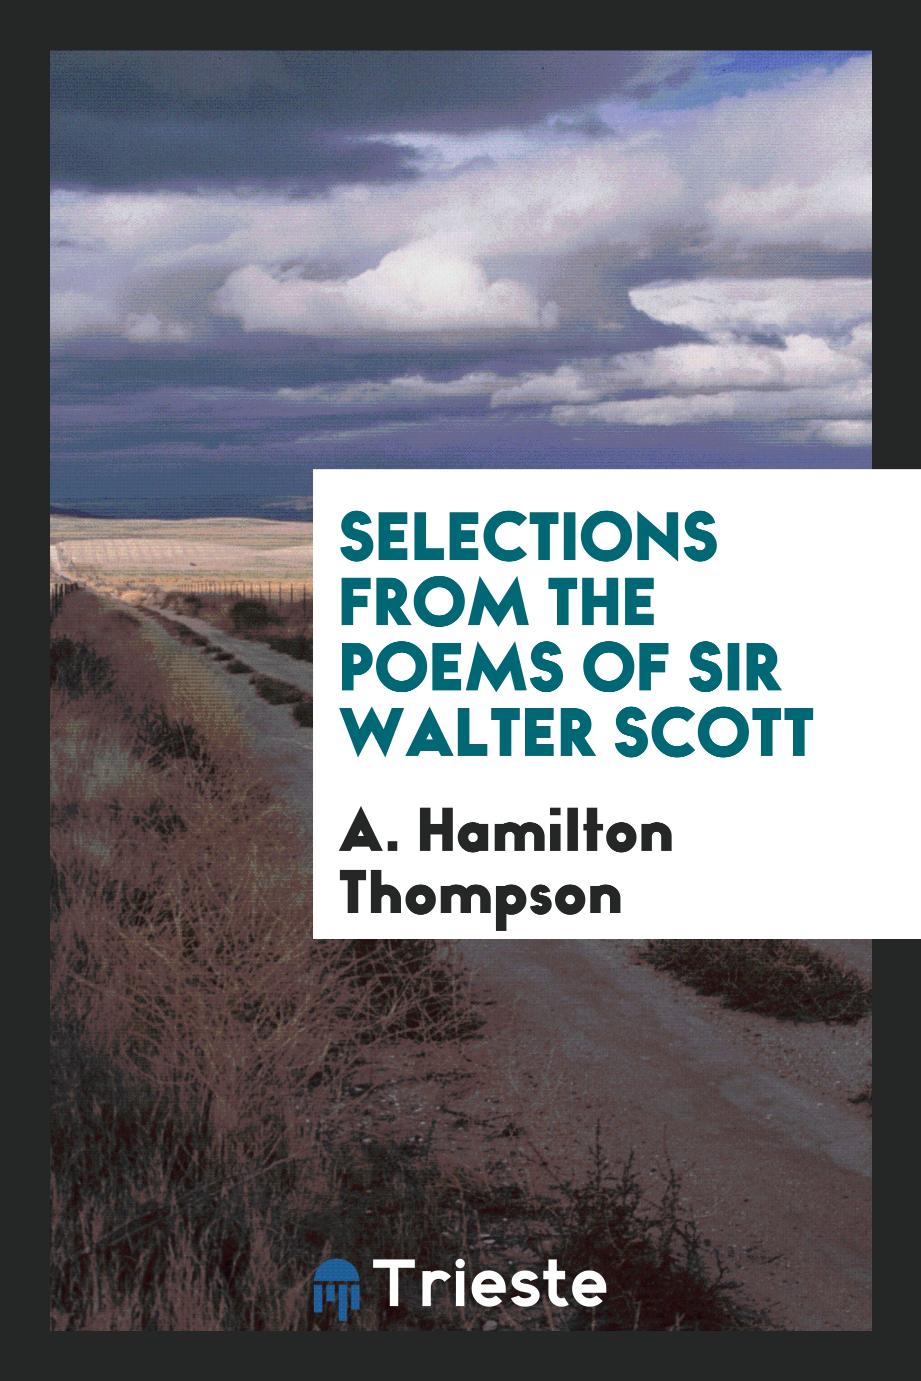 Selections from the poems of Sir Walter Scott